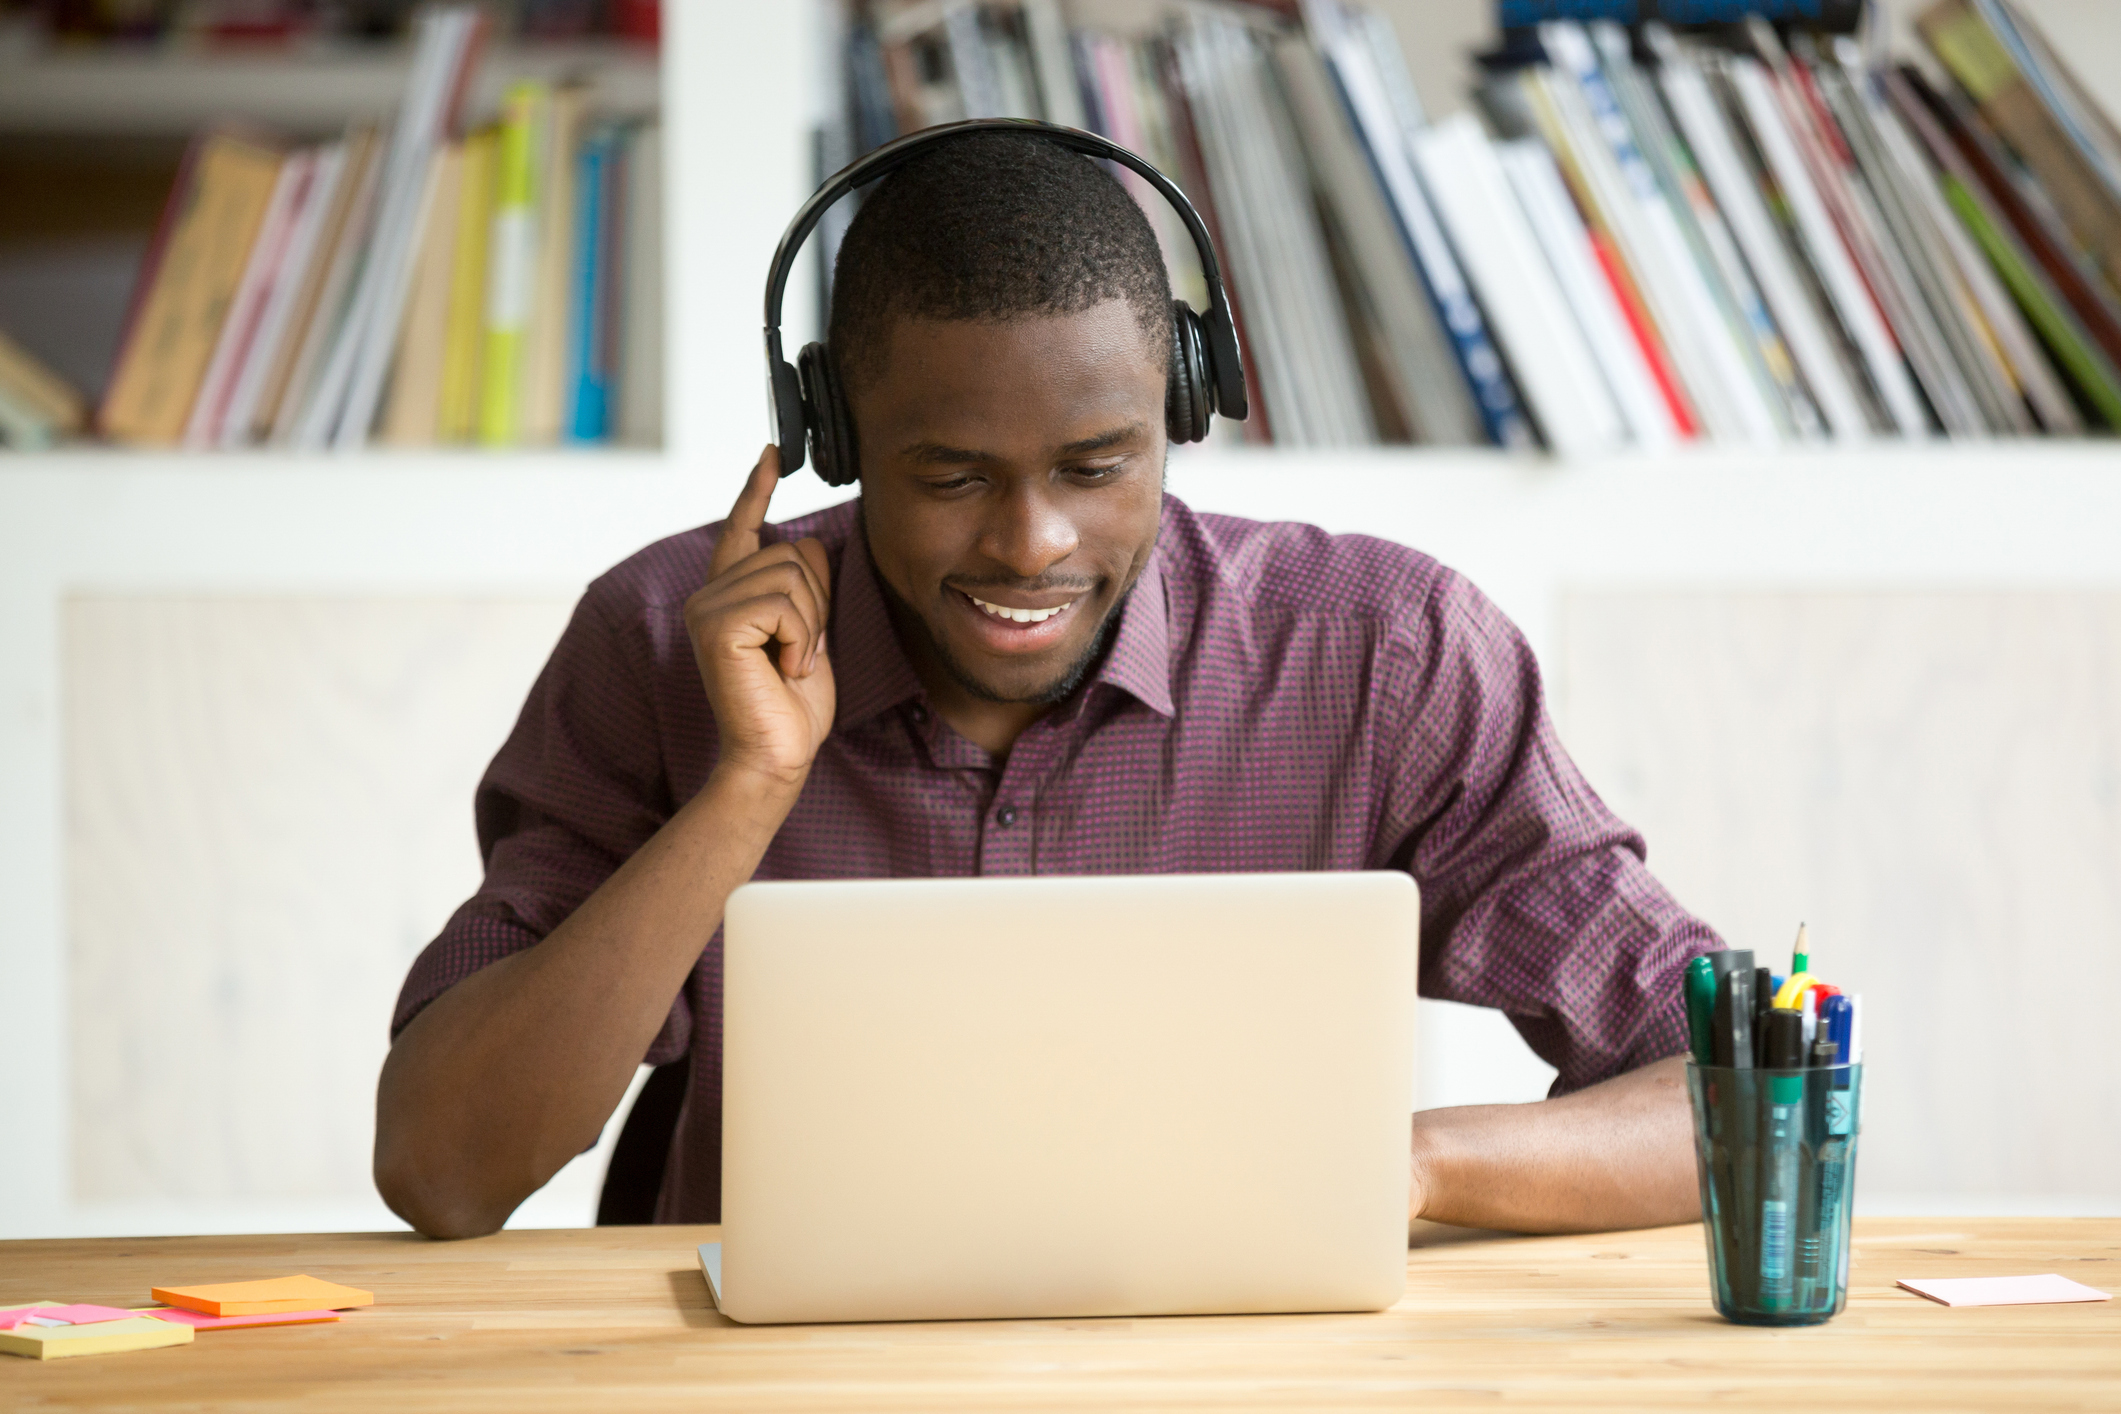 Man listening on headphones with a laptop